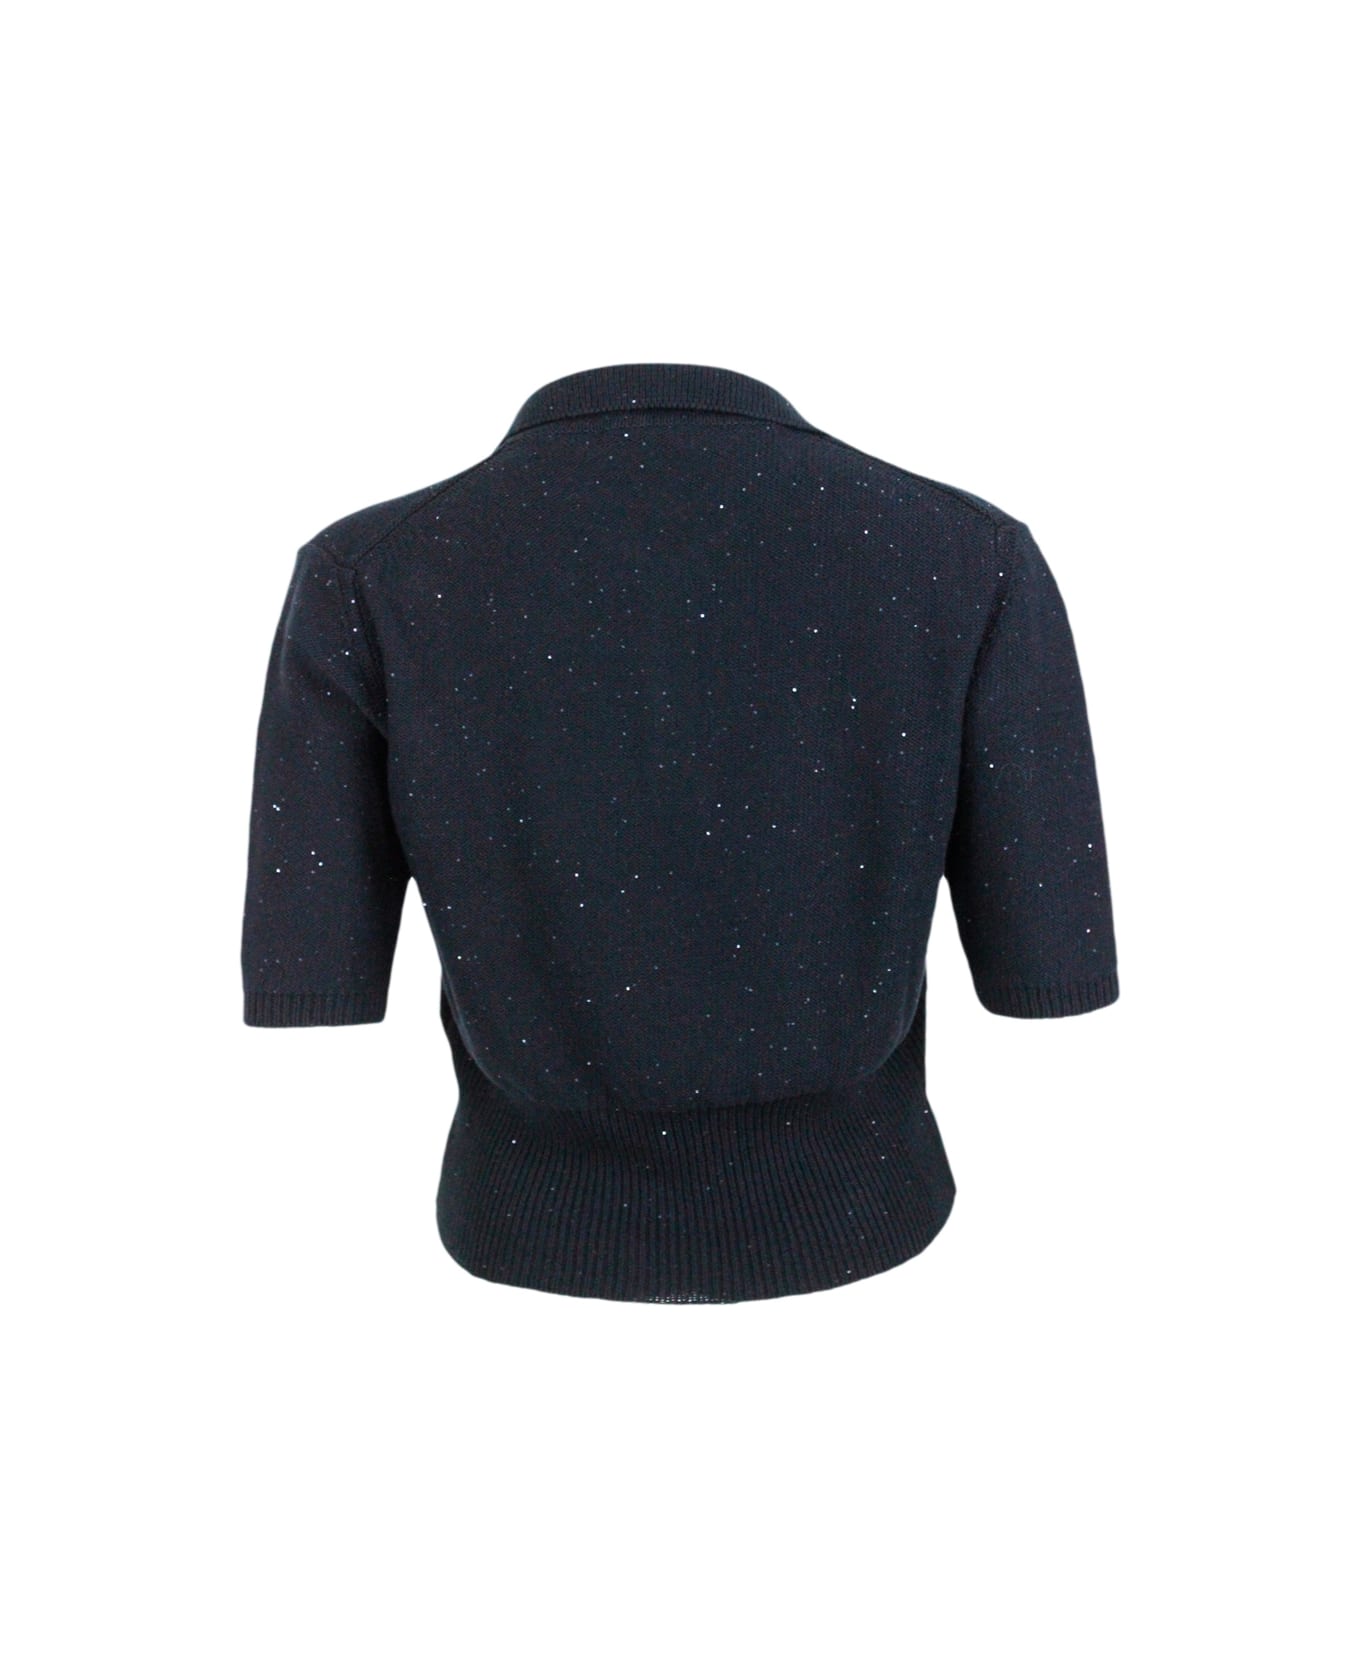 Fabiana Filippi Short-sleeved Polo Shirt In Cotton And Linen, Embellished With Brilliant Applied Micro-sequins - Black